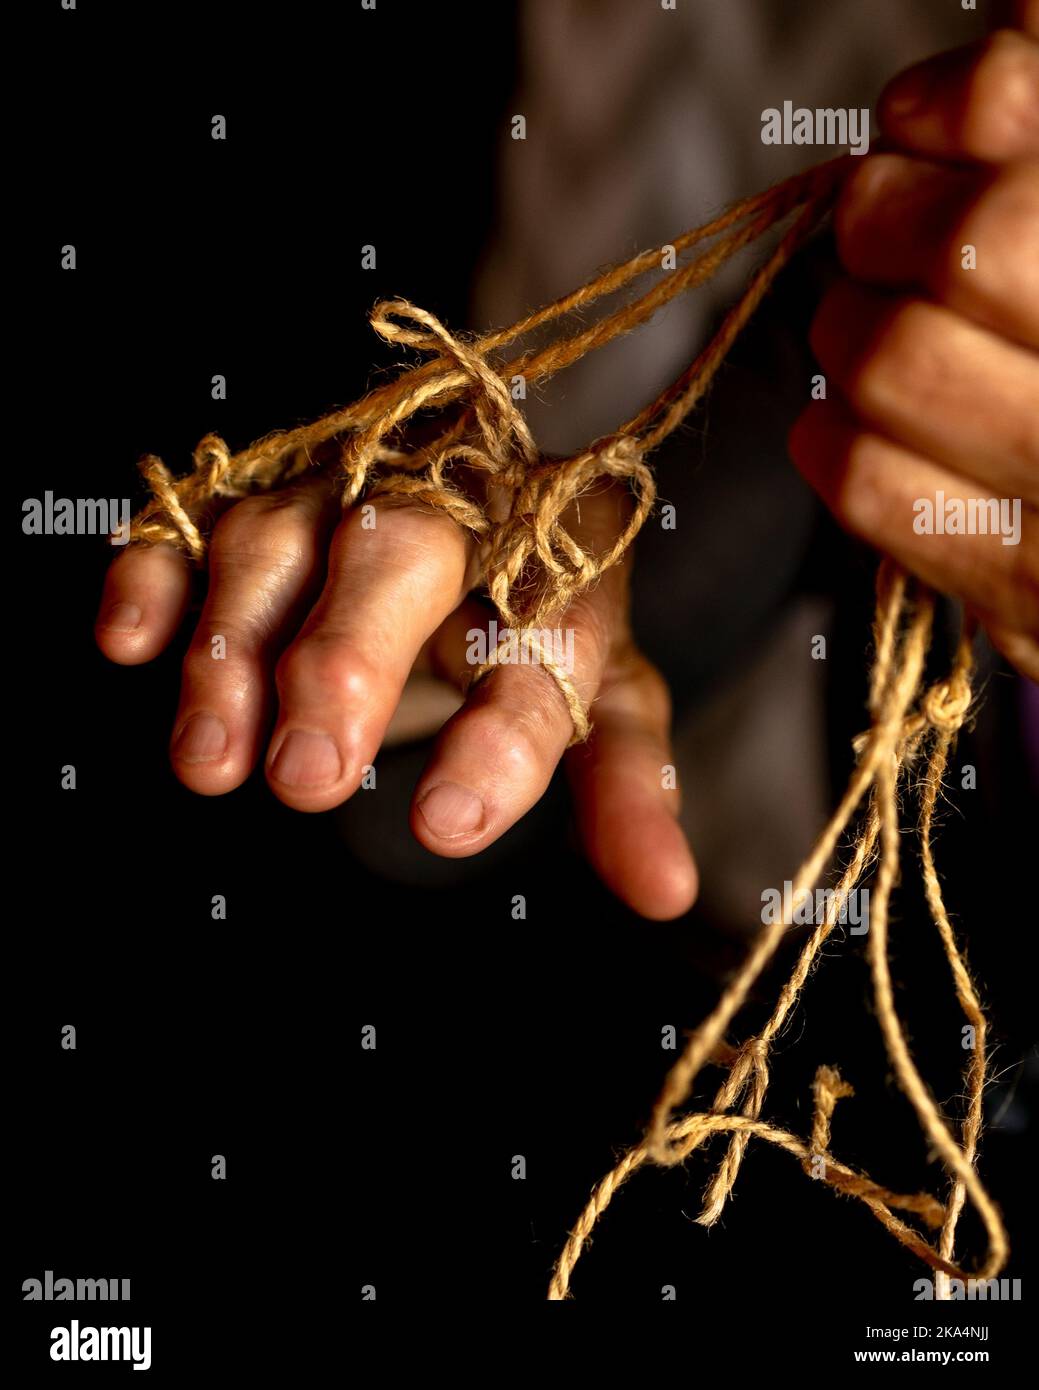 Hands of old woman with polyarthritis disease. Canvas strings on fingers of elderly lady, puppets. High quality photo Stock Photo